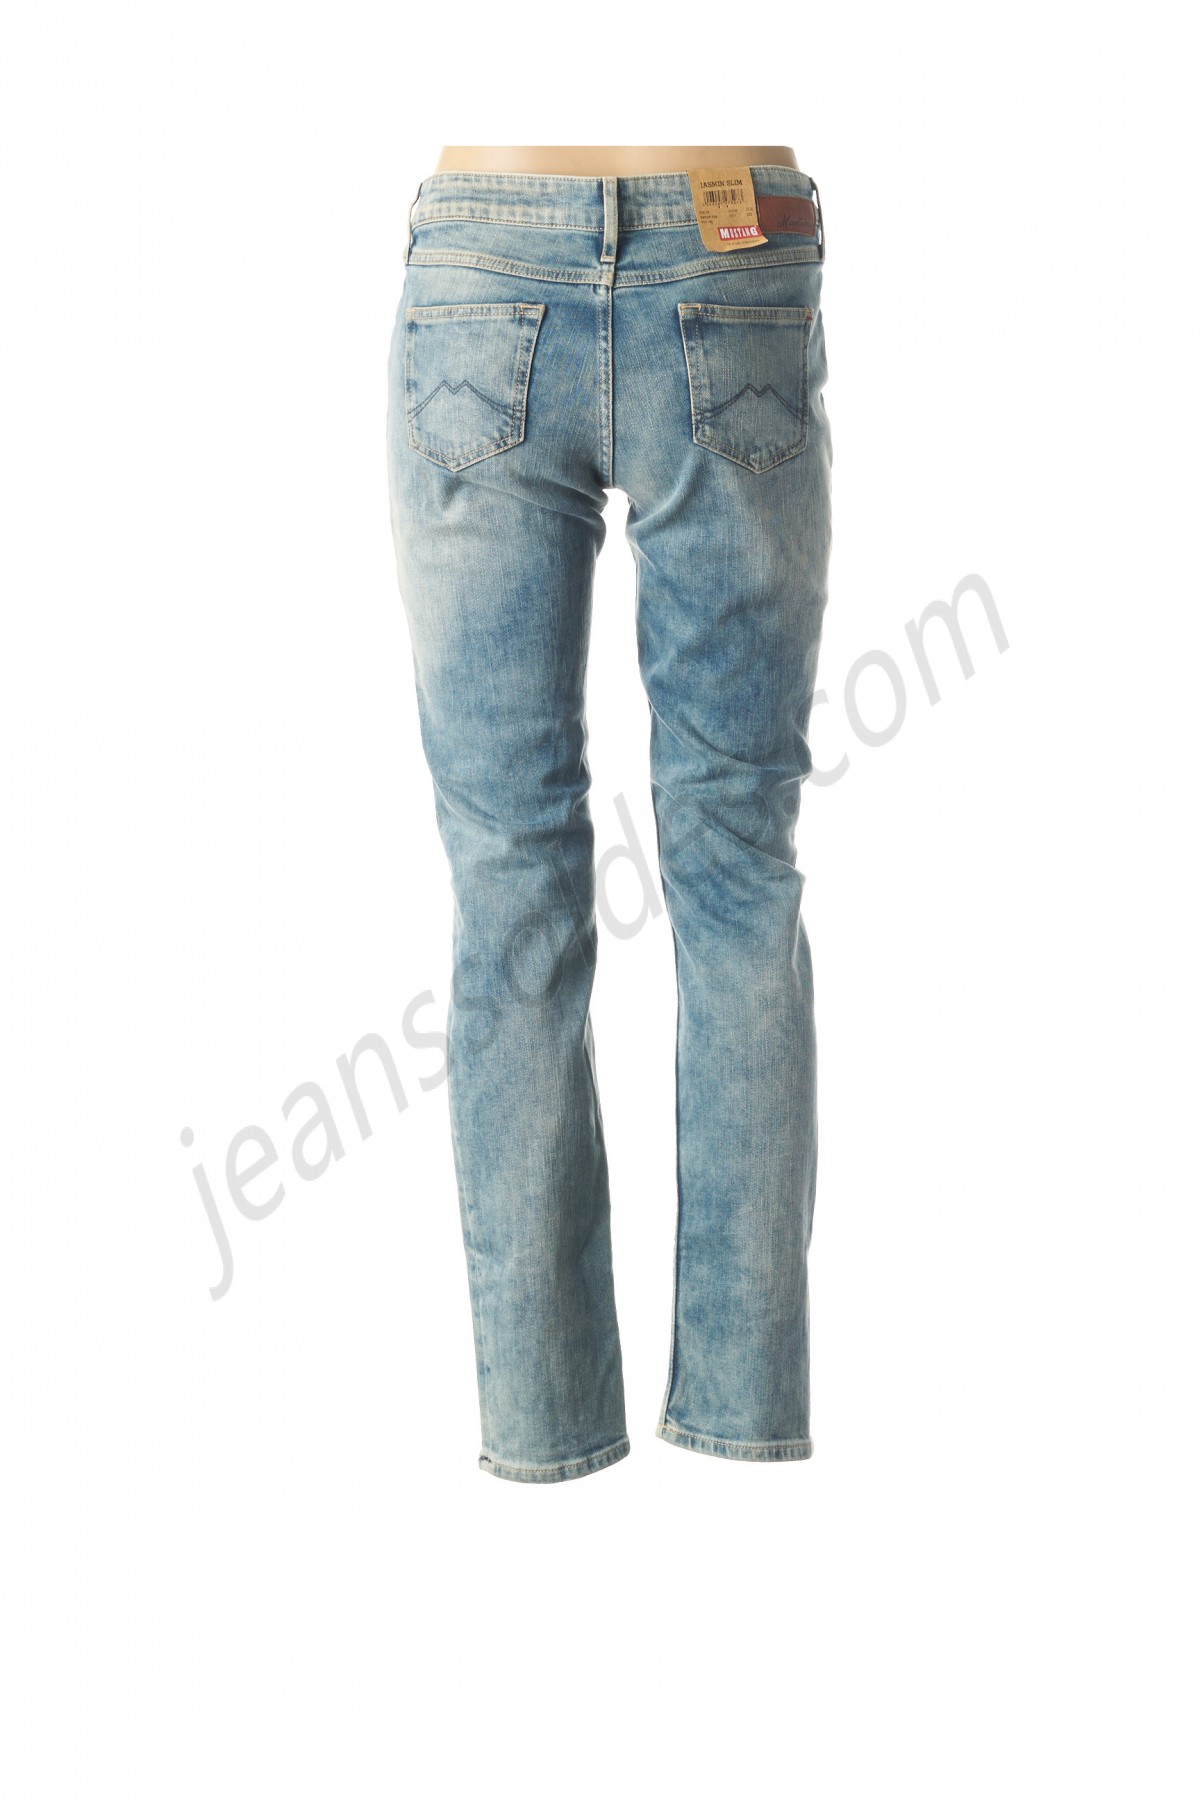 mustang-Jeans coupe slim prix d’amis - -1